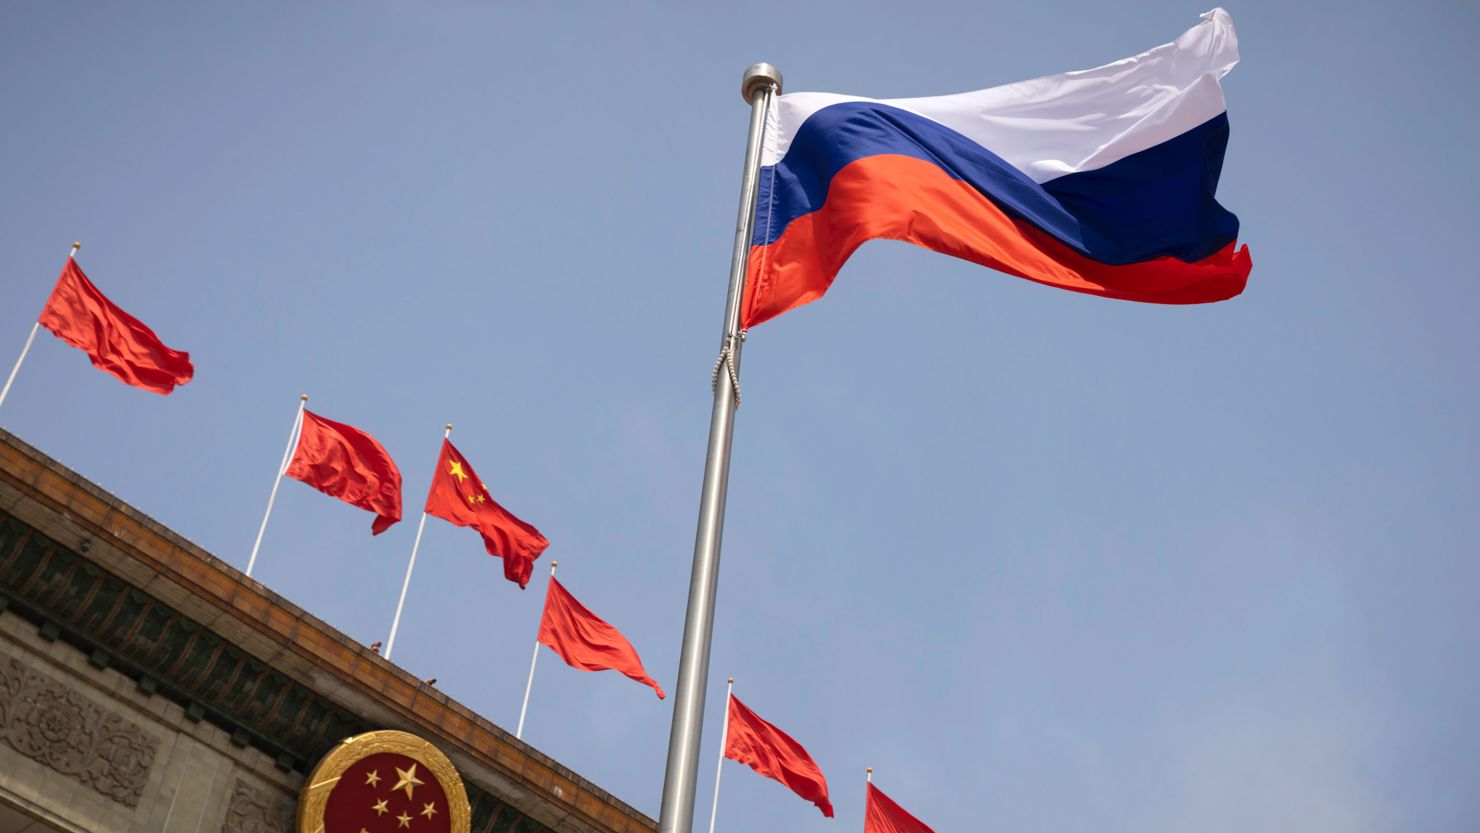 The Russian national flag flies in front of the Great Hall of the People before a welcoming ceremony for Russian Prime Minister Mikhail Mishustin in Beijing, China, Wednesday, May 24, 2023.